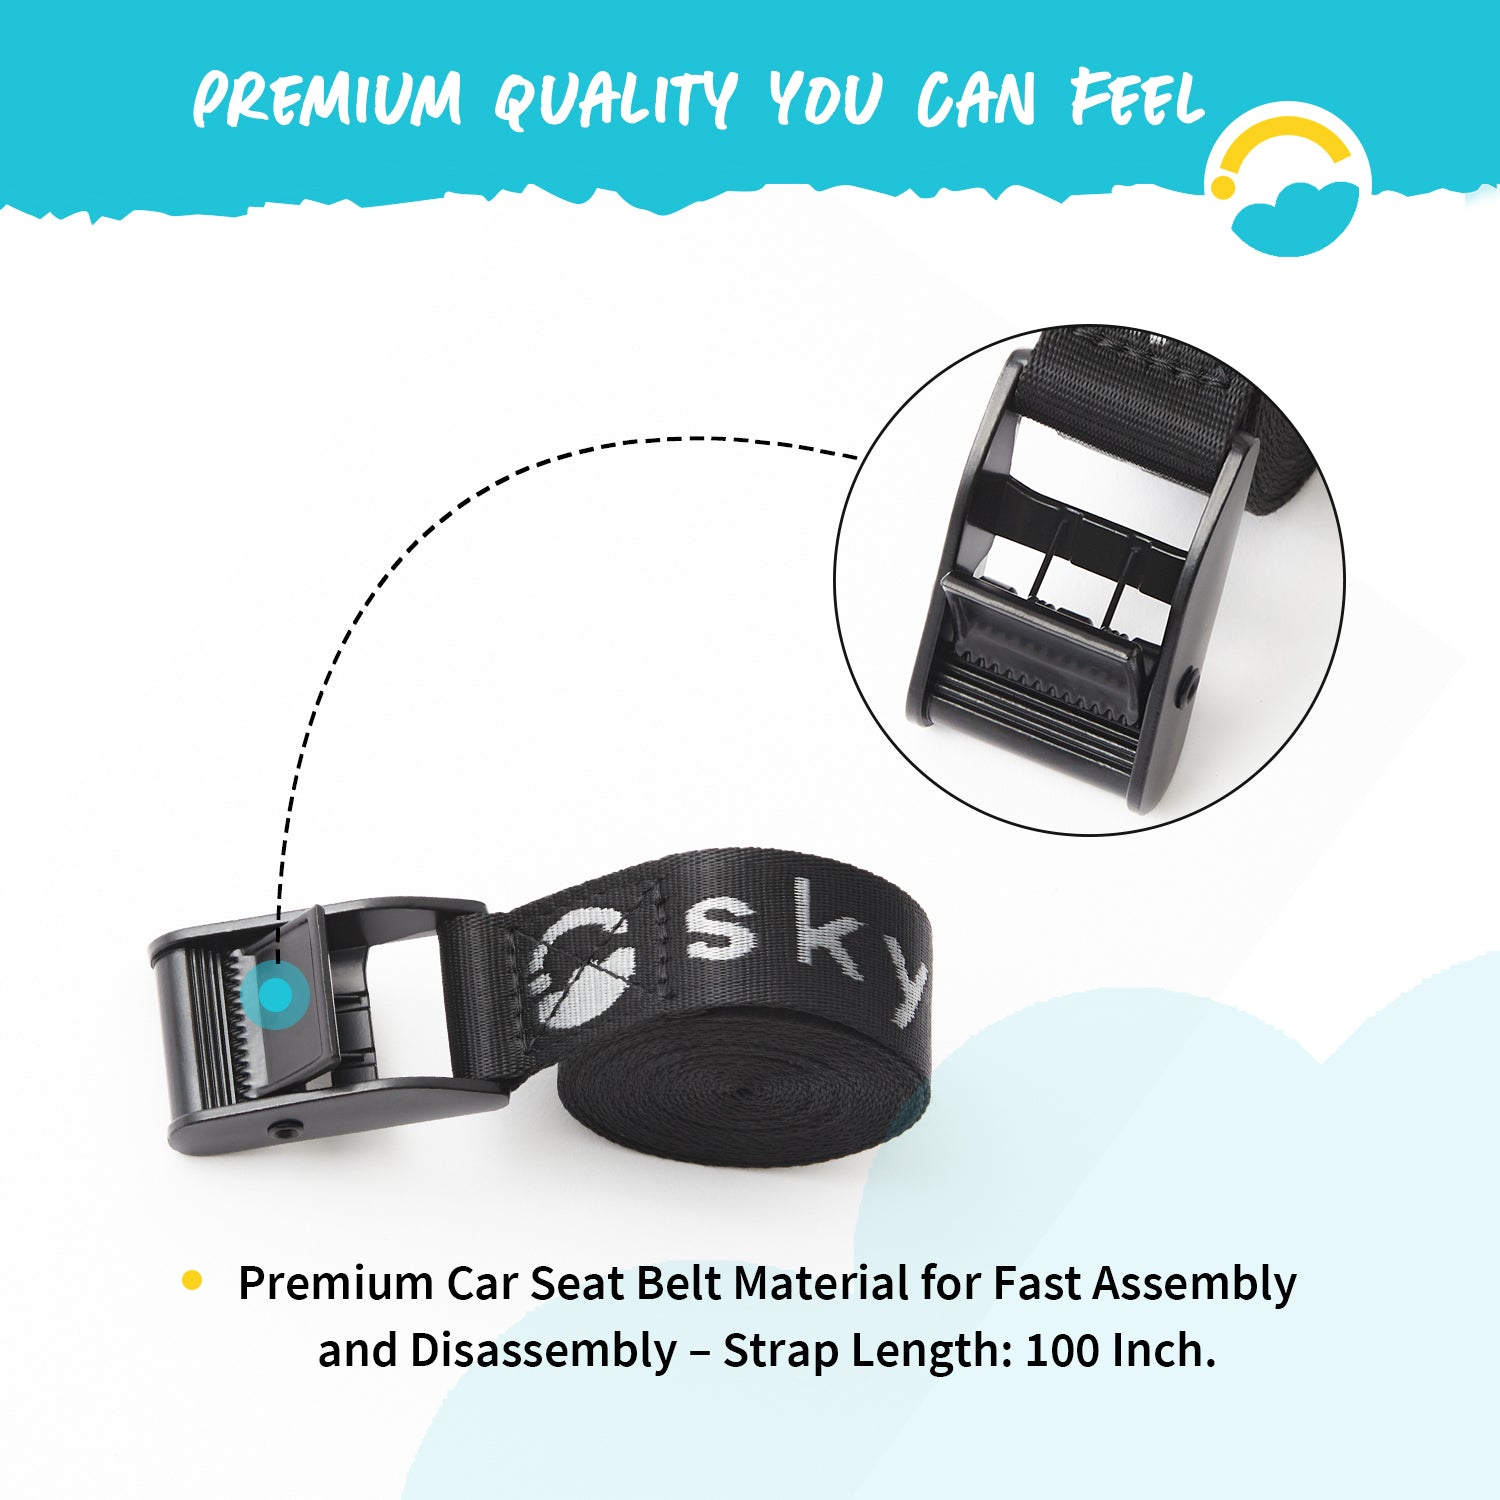 Premium Quality You Can Feel:  Premium Car Seat Belt Material for Fast Assembly and Disassembly-Strap Length: 100 Inch.  